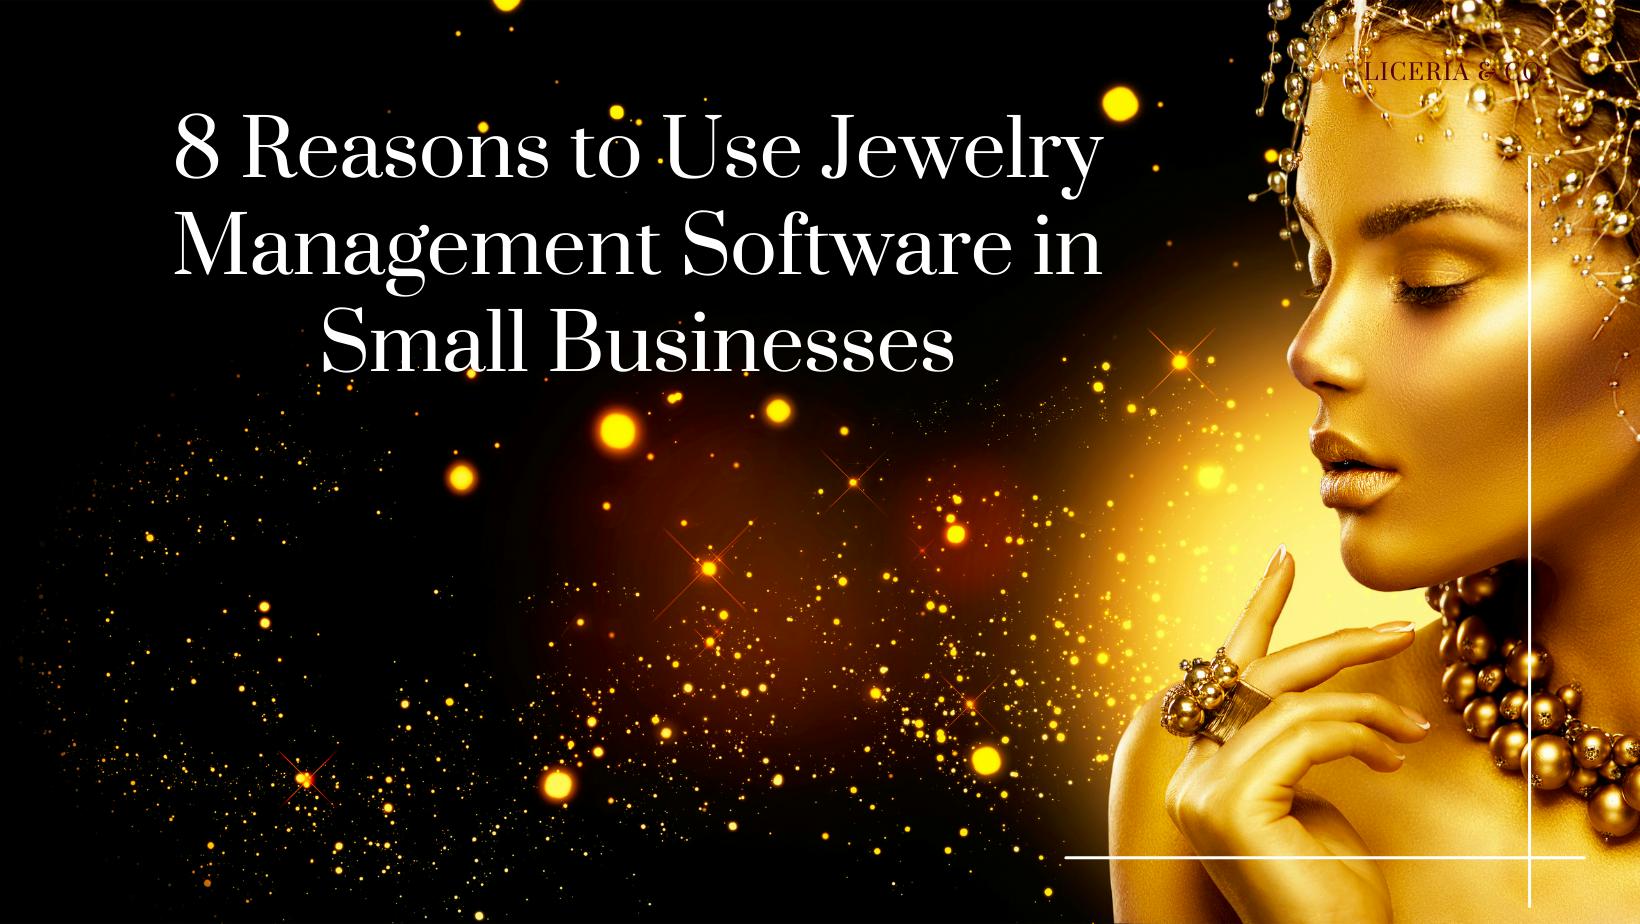 8 Compelling Reasons to Implement Jewelry Management Software in Small Businesses